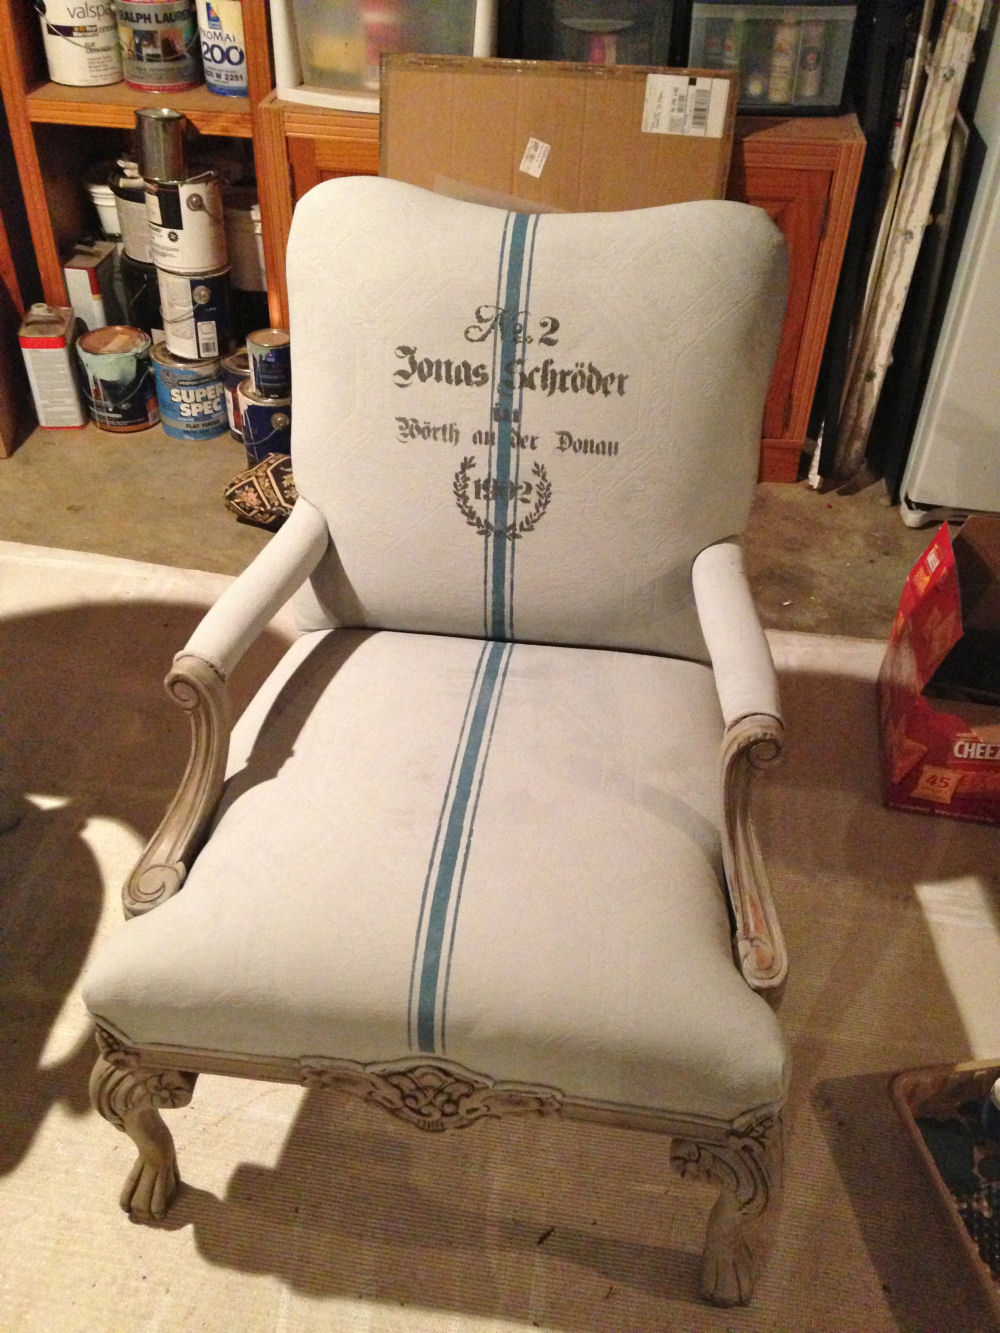 How to Paint Upholstery (Latex Paint and Fabric Medium) - The Kim